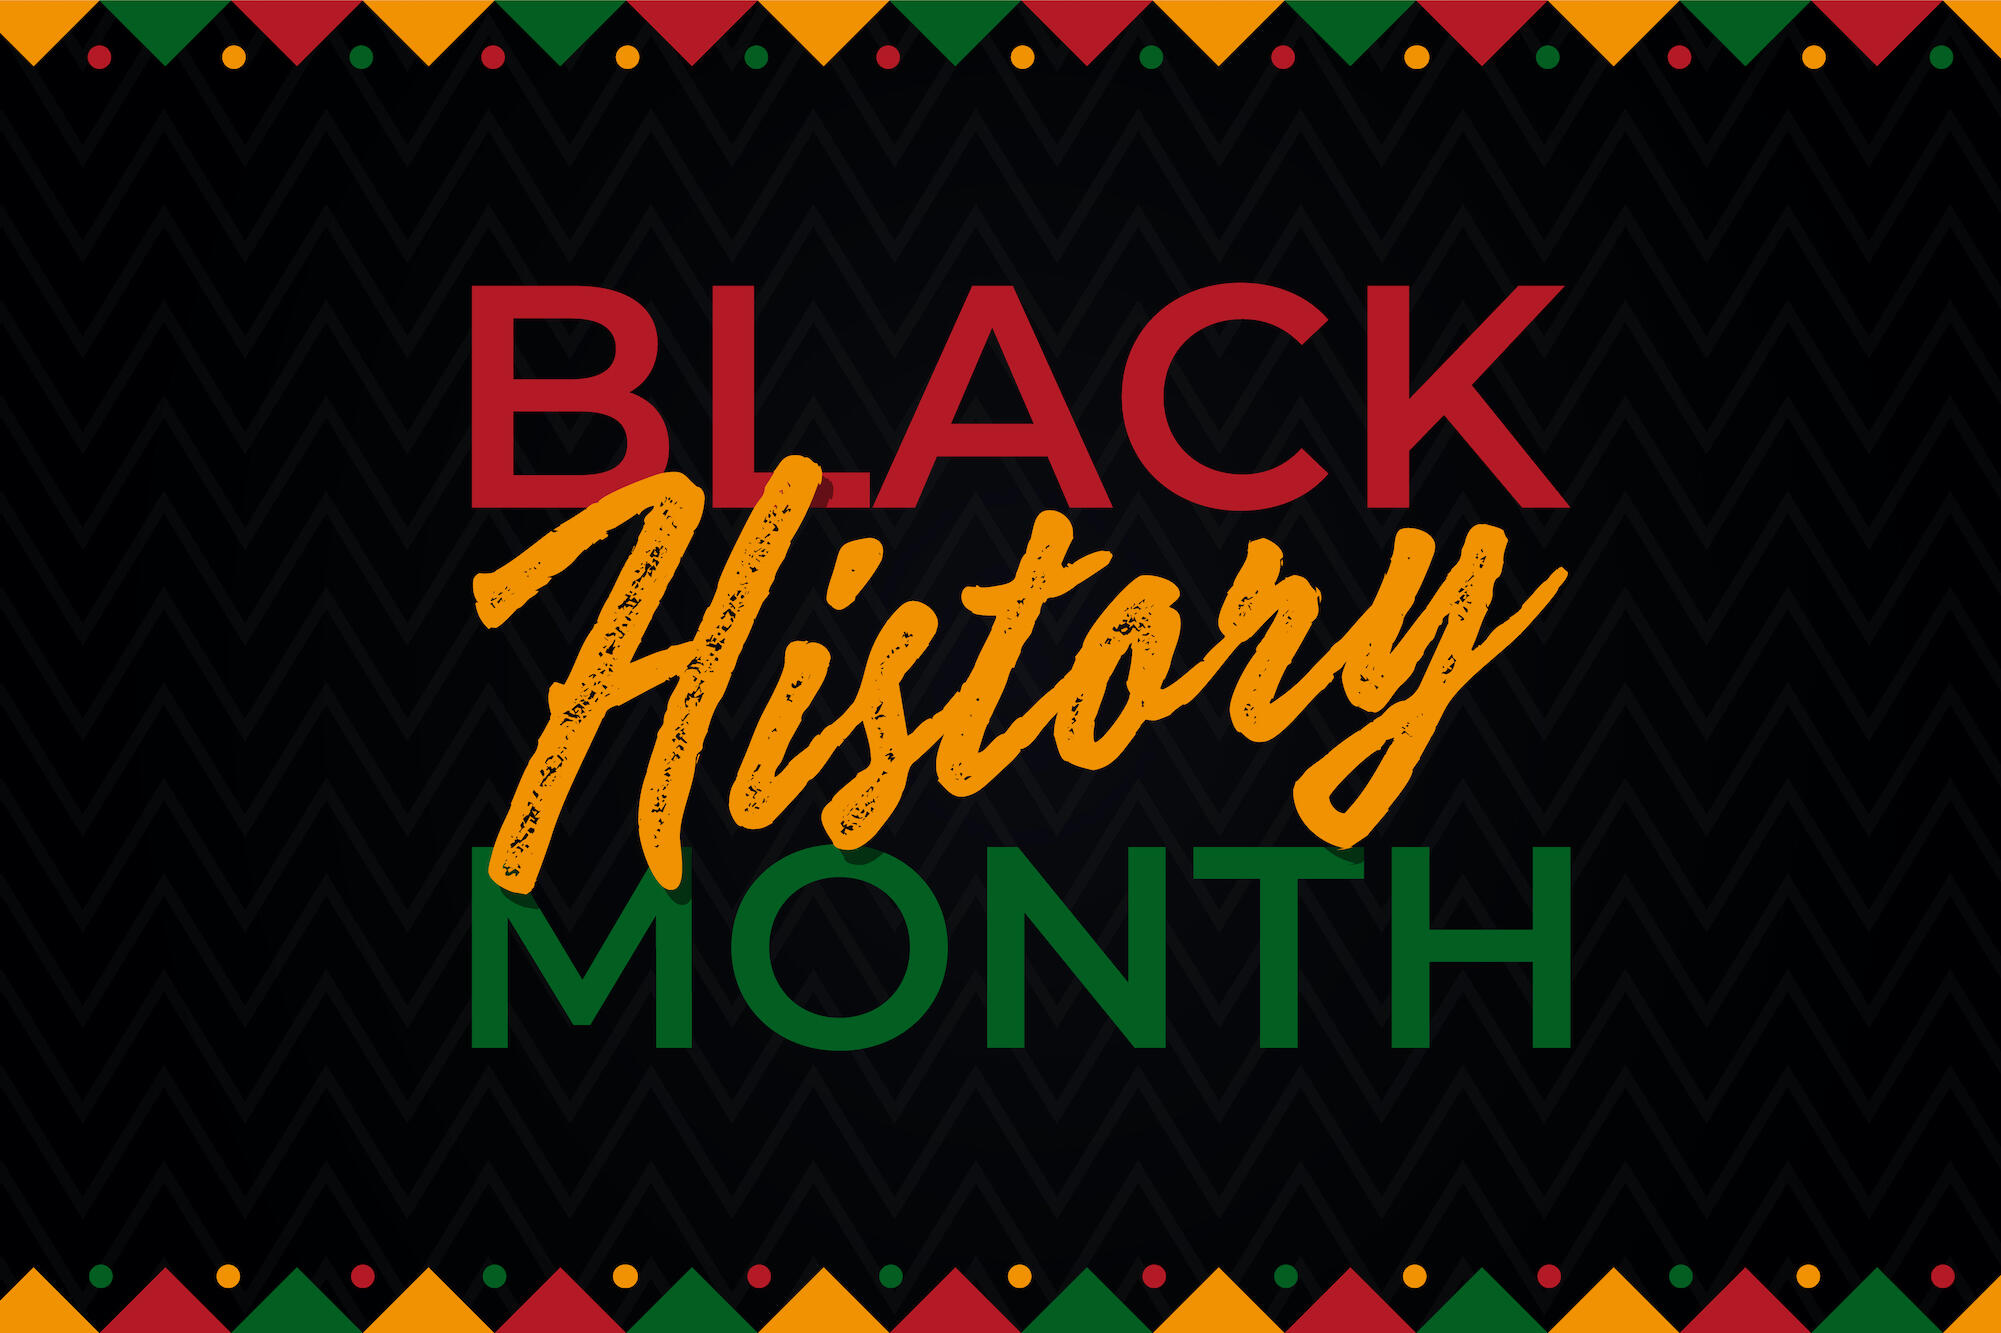 Black History Month in red, yellow, and green text on a black background and a red, yellow, and green geometric patterned border. 